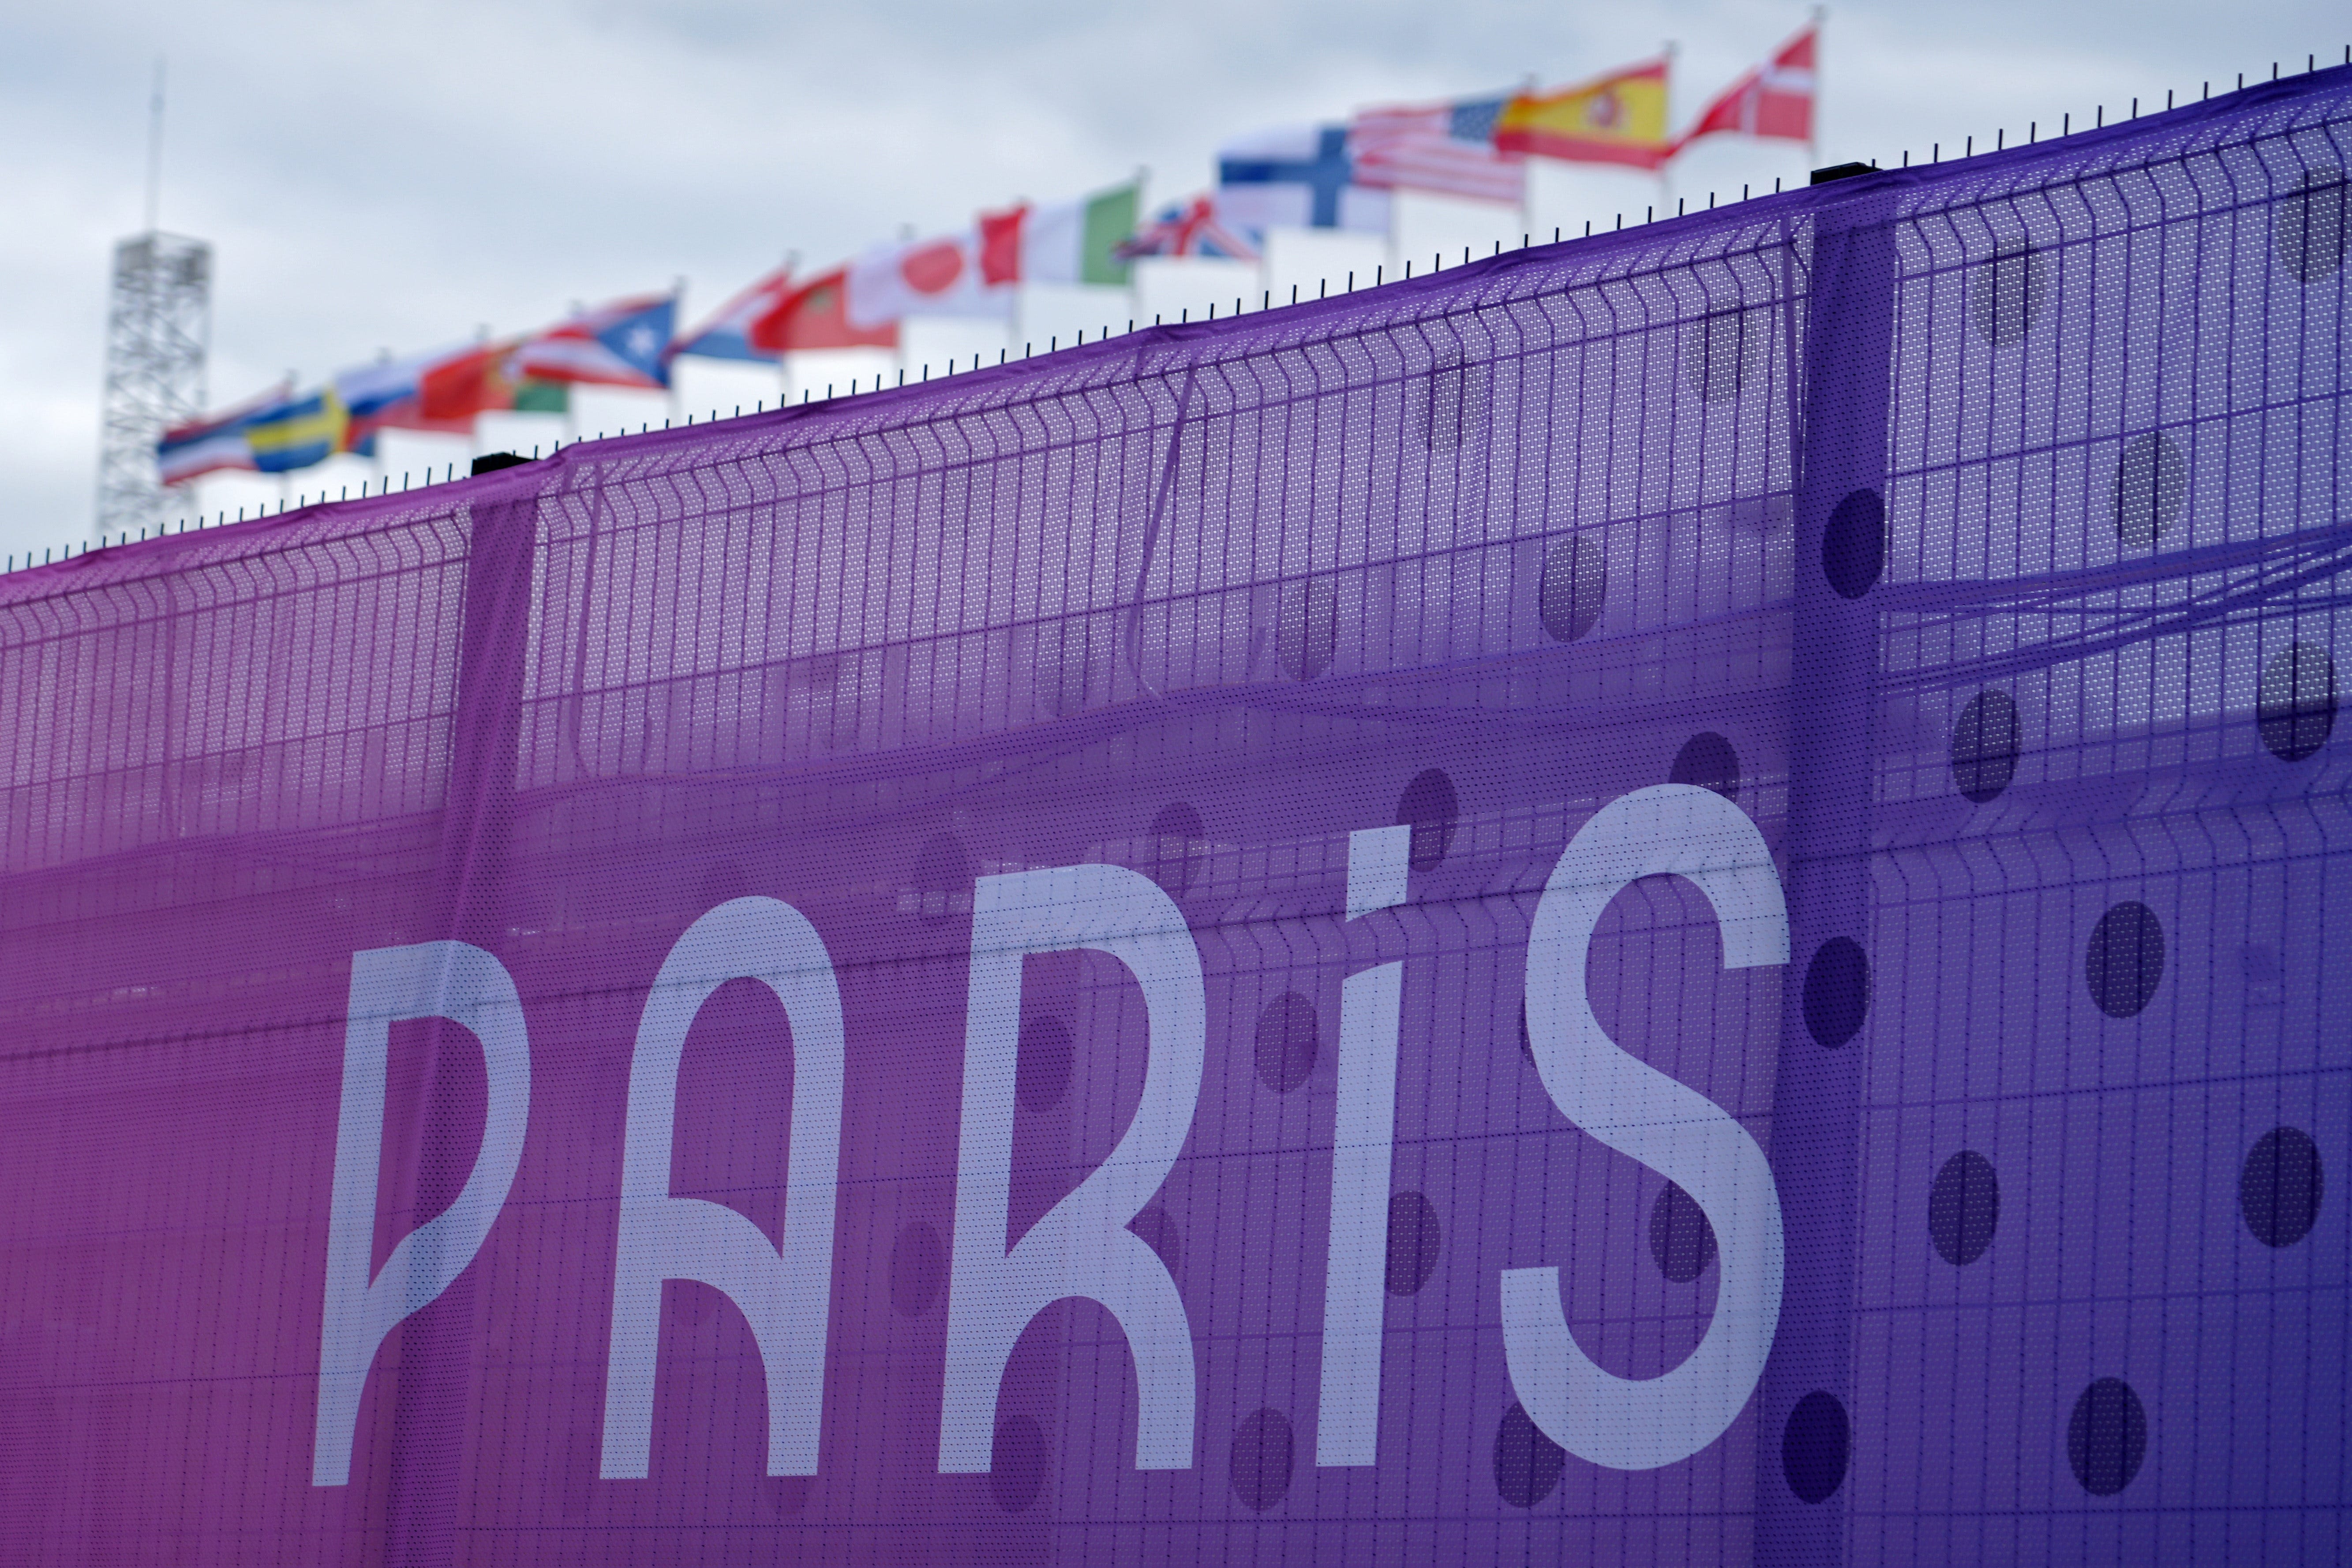 Olympics TV schedule today: Here's every sport happening today at Paris Games and how to watch